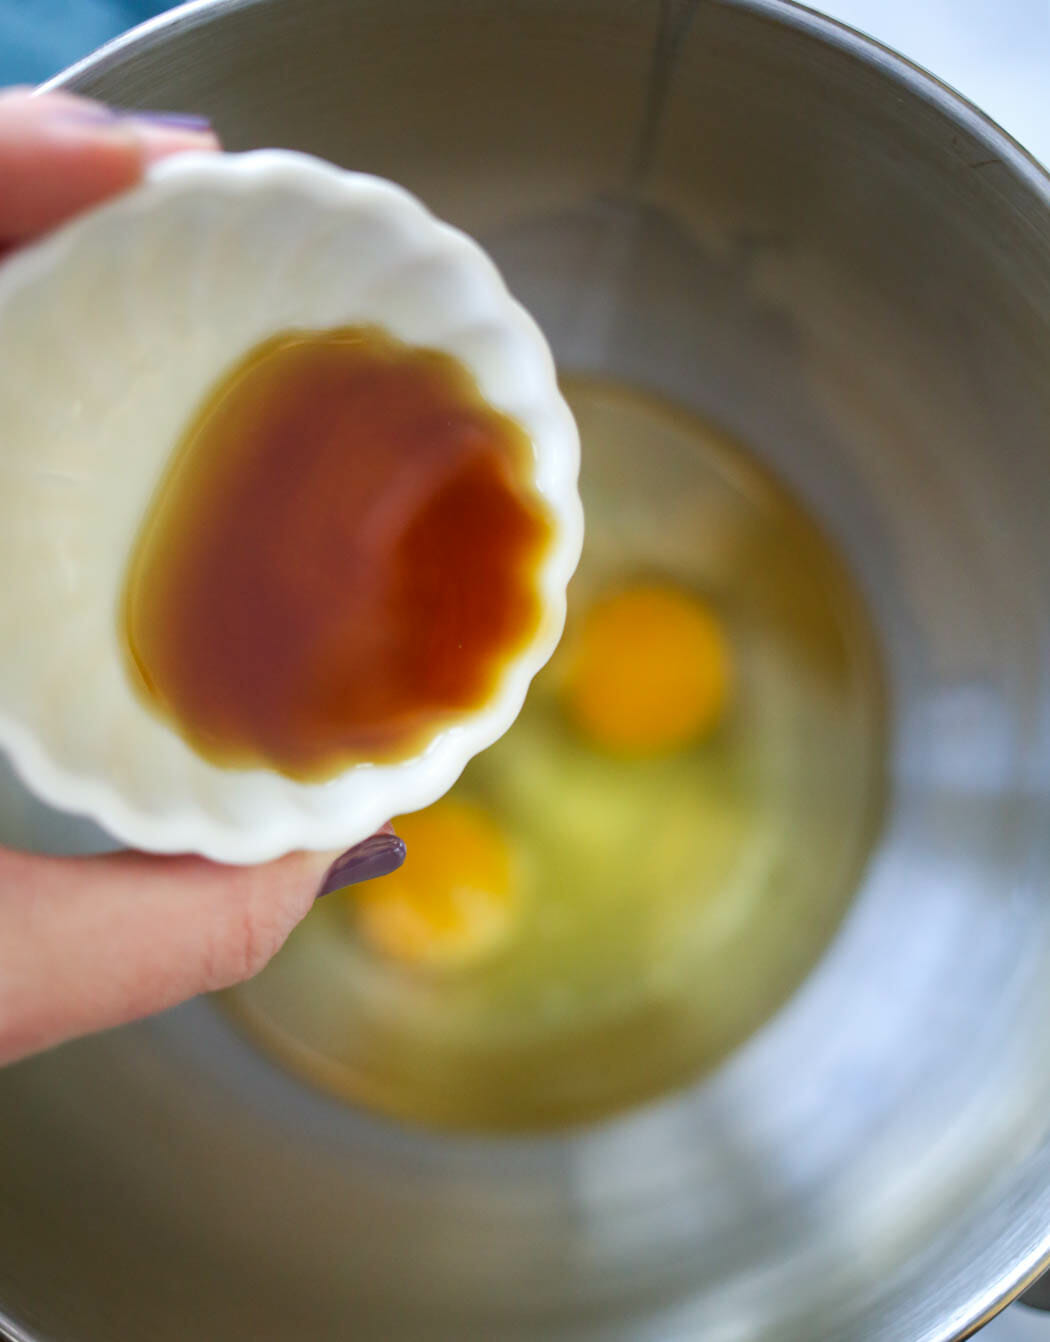 adding flavor extracts to eggs